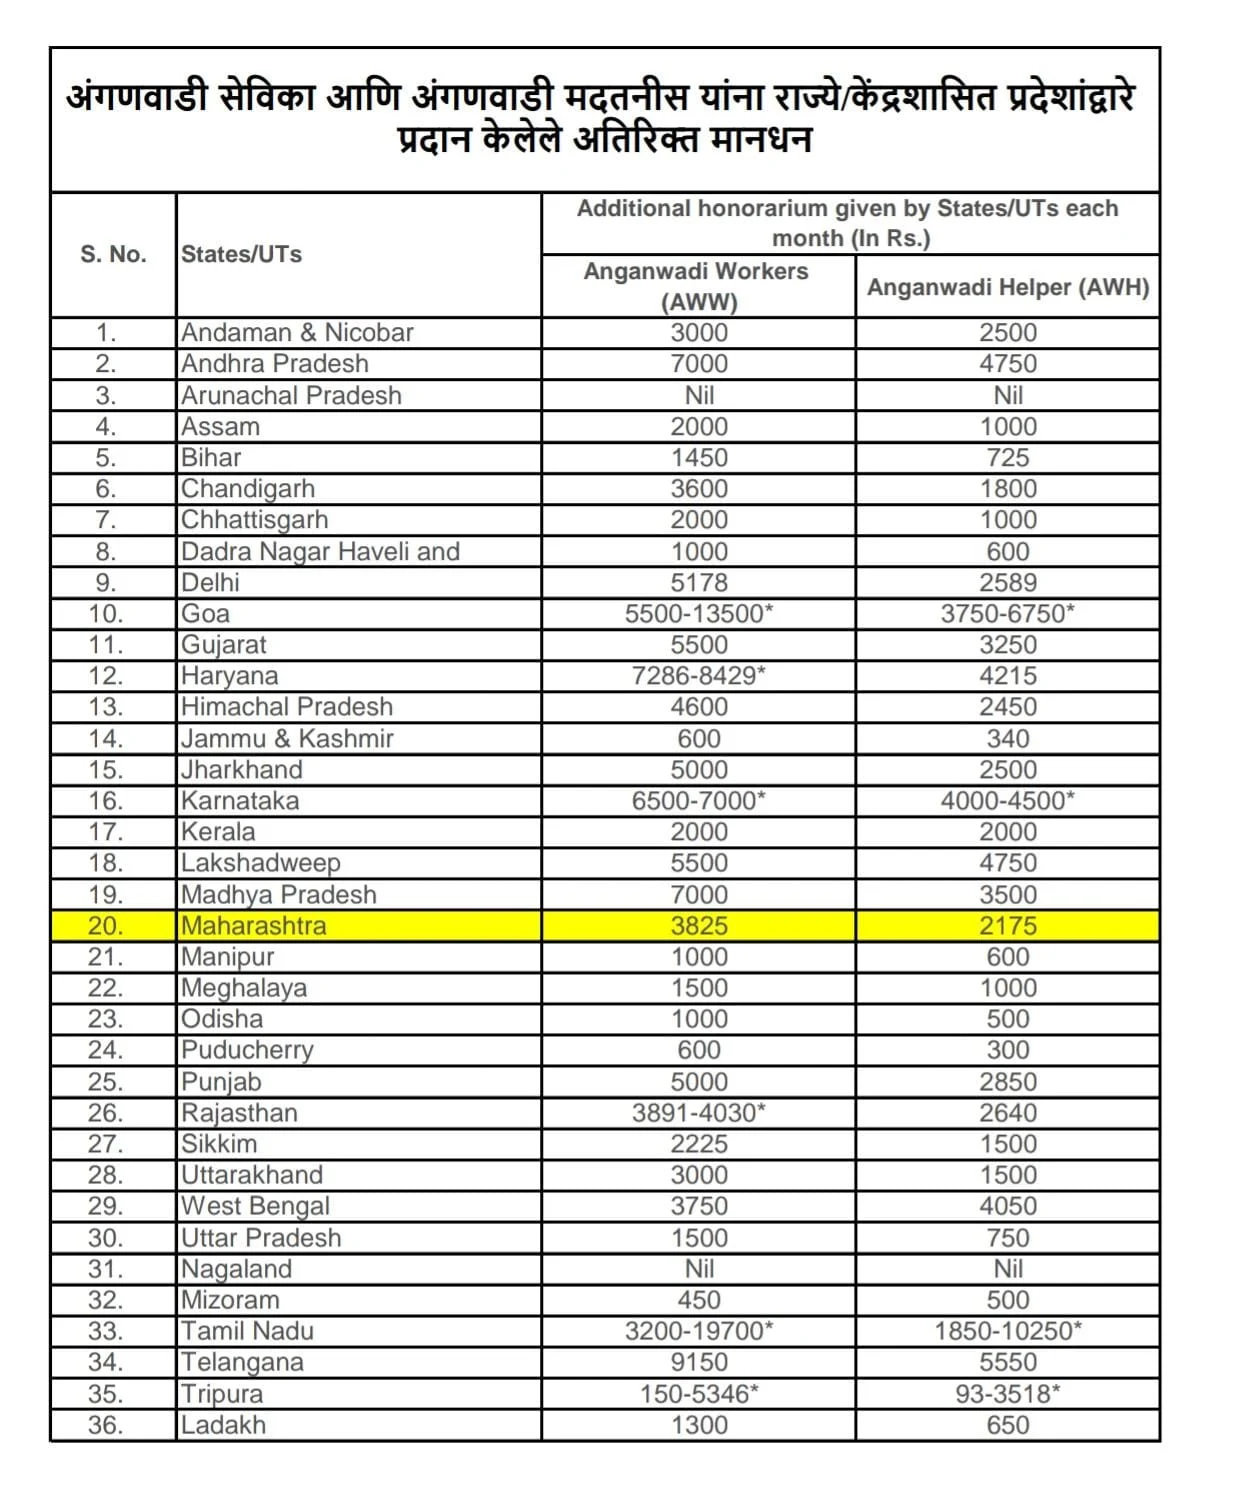 State-wise list of number of Anganwadi Workers and Anganwadi Helpers